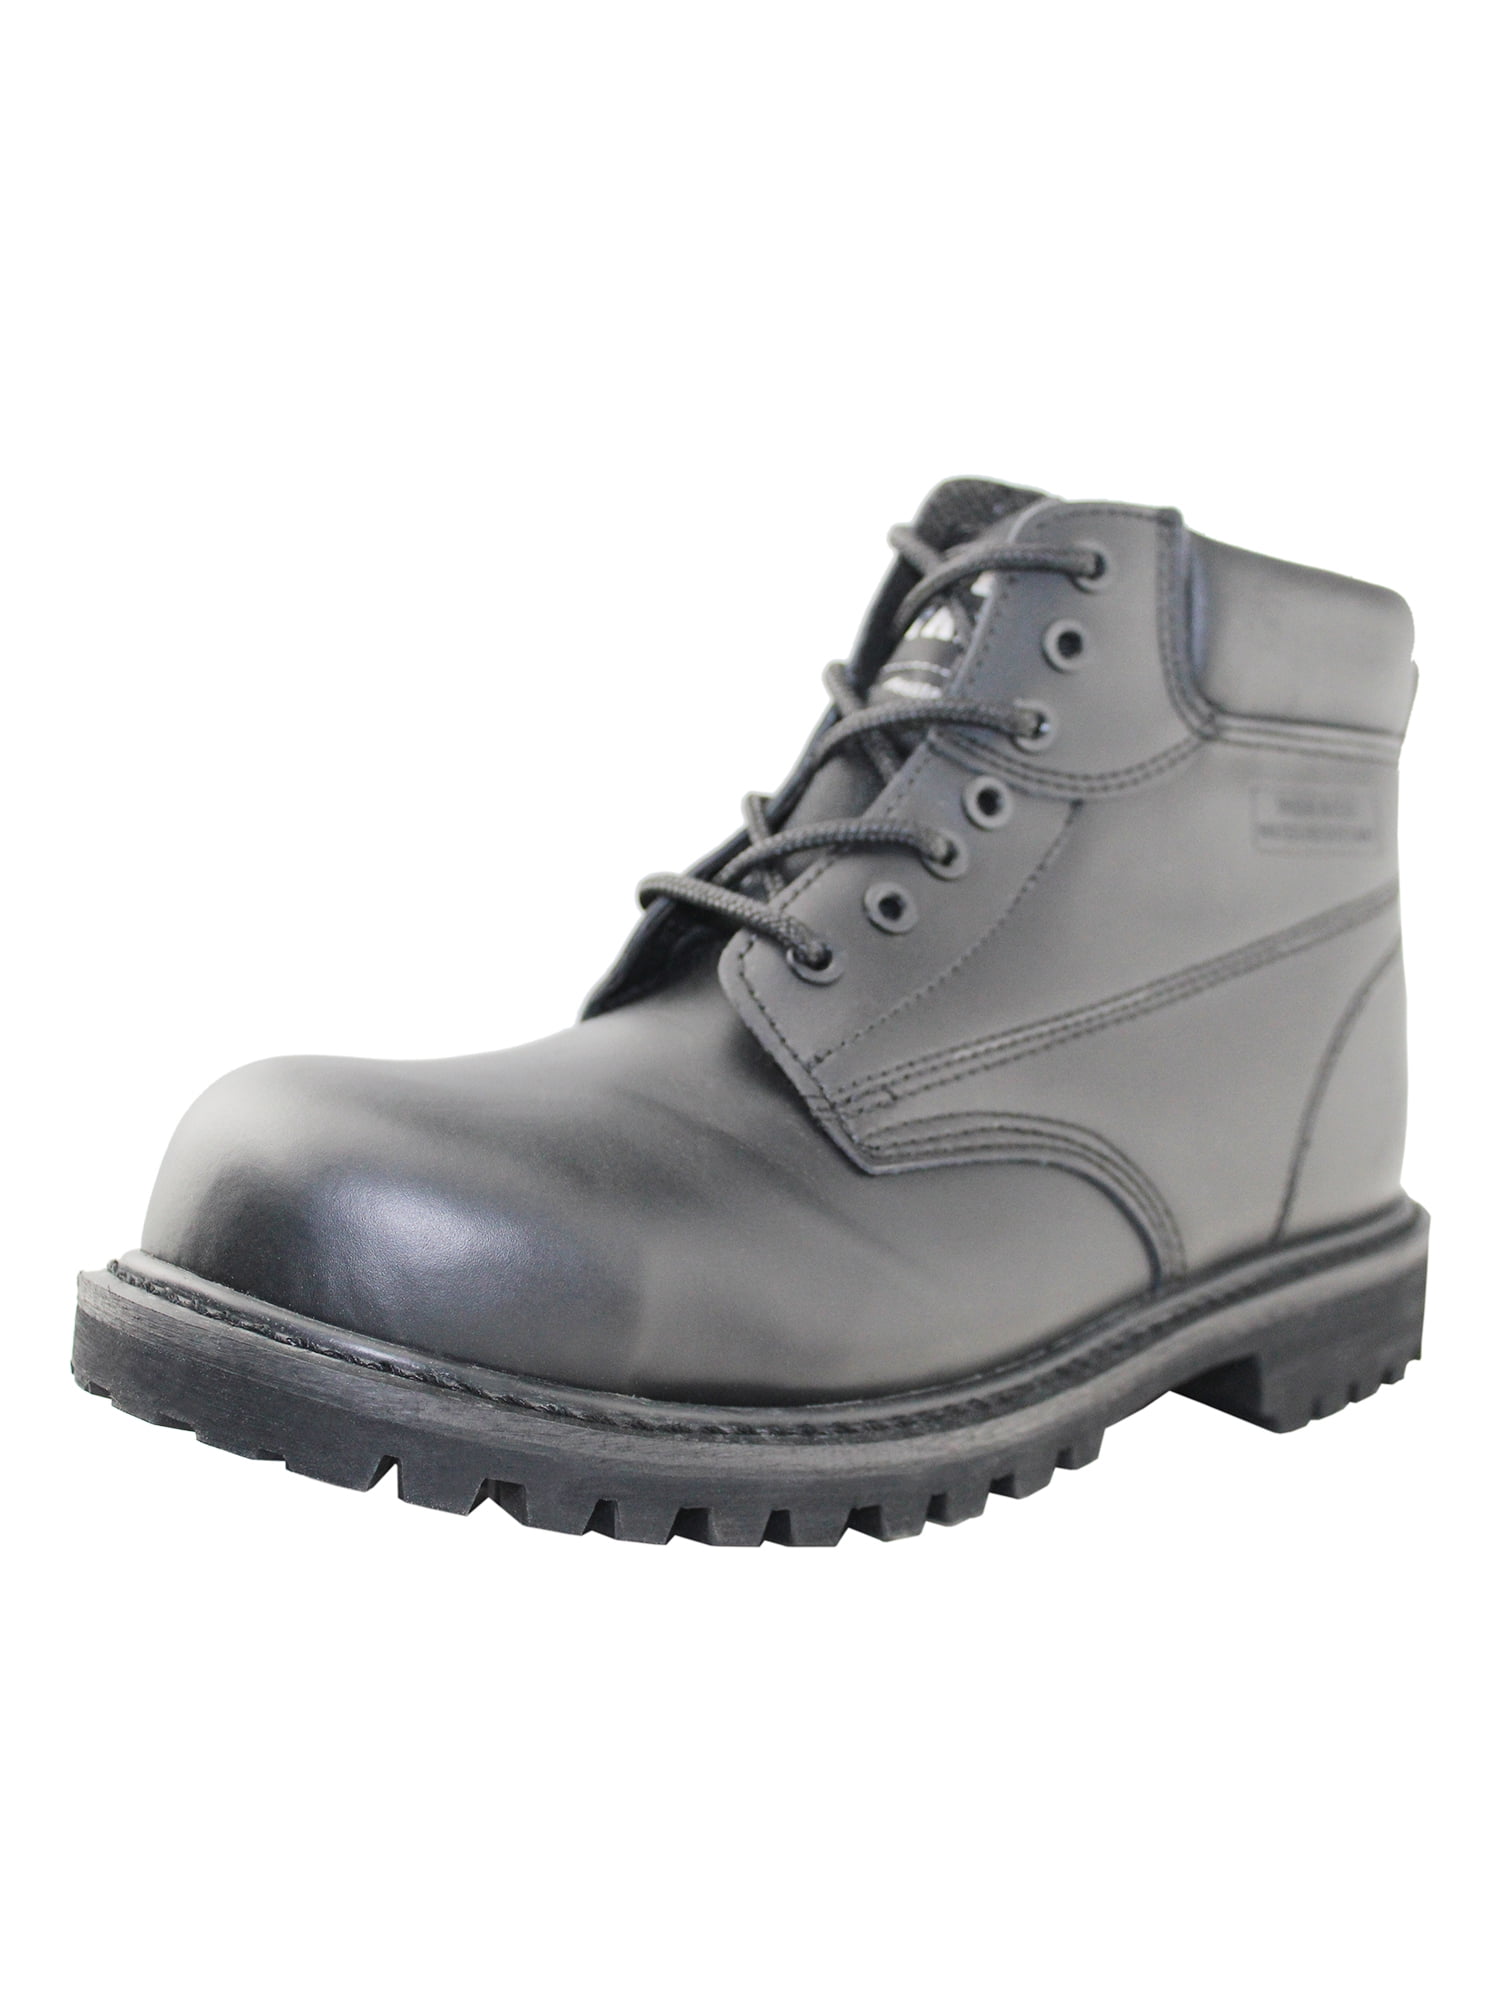 work shoes for men composite toe